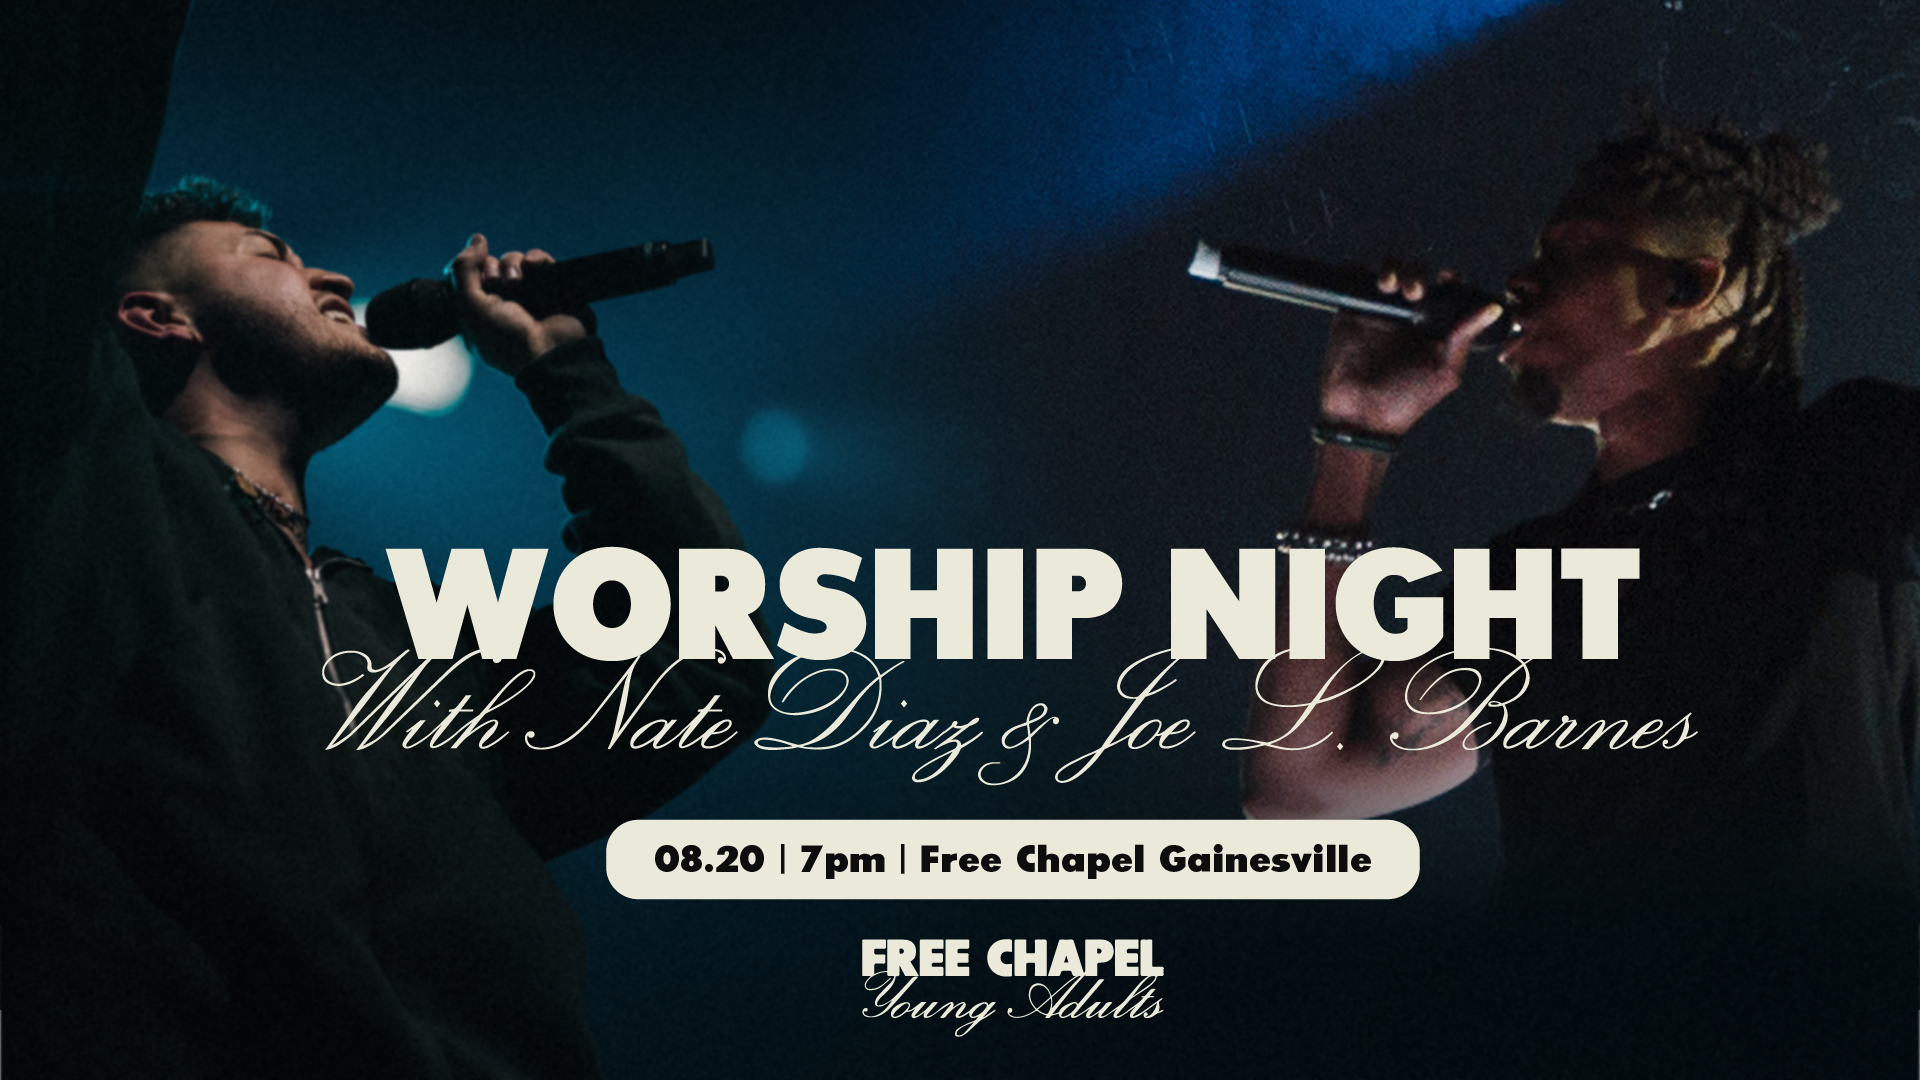 Young Adults United Worship Night with Nate Diaz & Joe L. Barnes at the Midtown campus